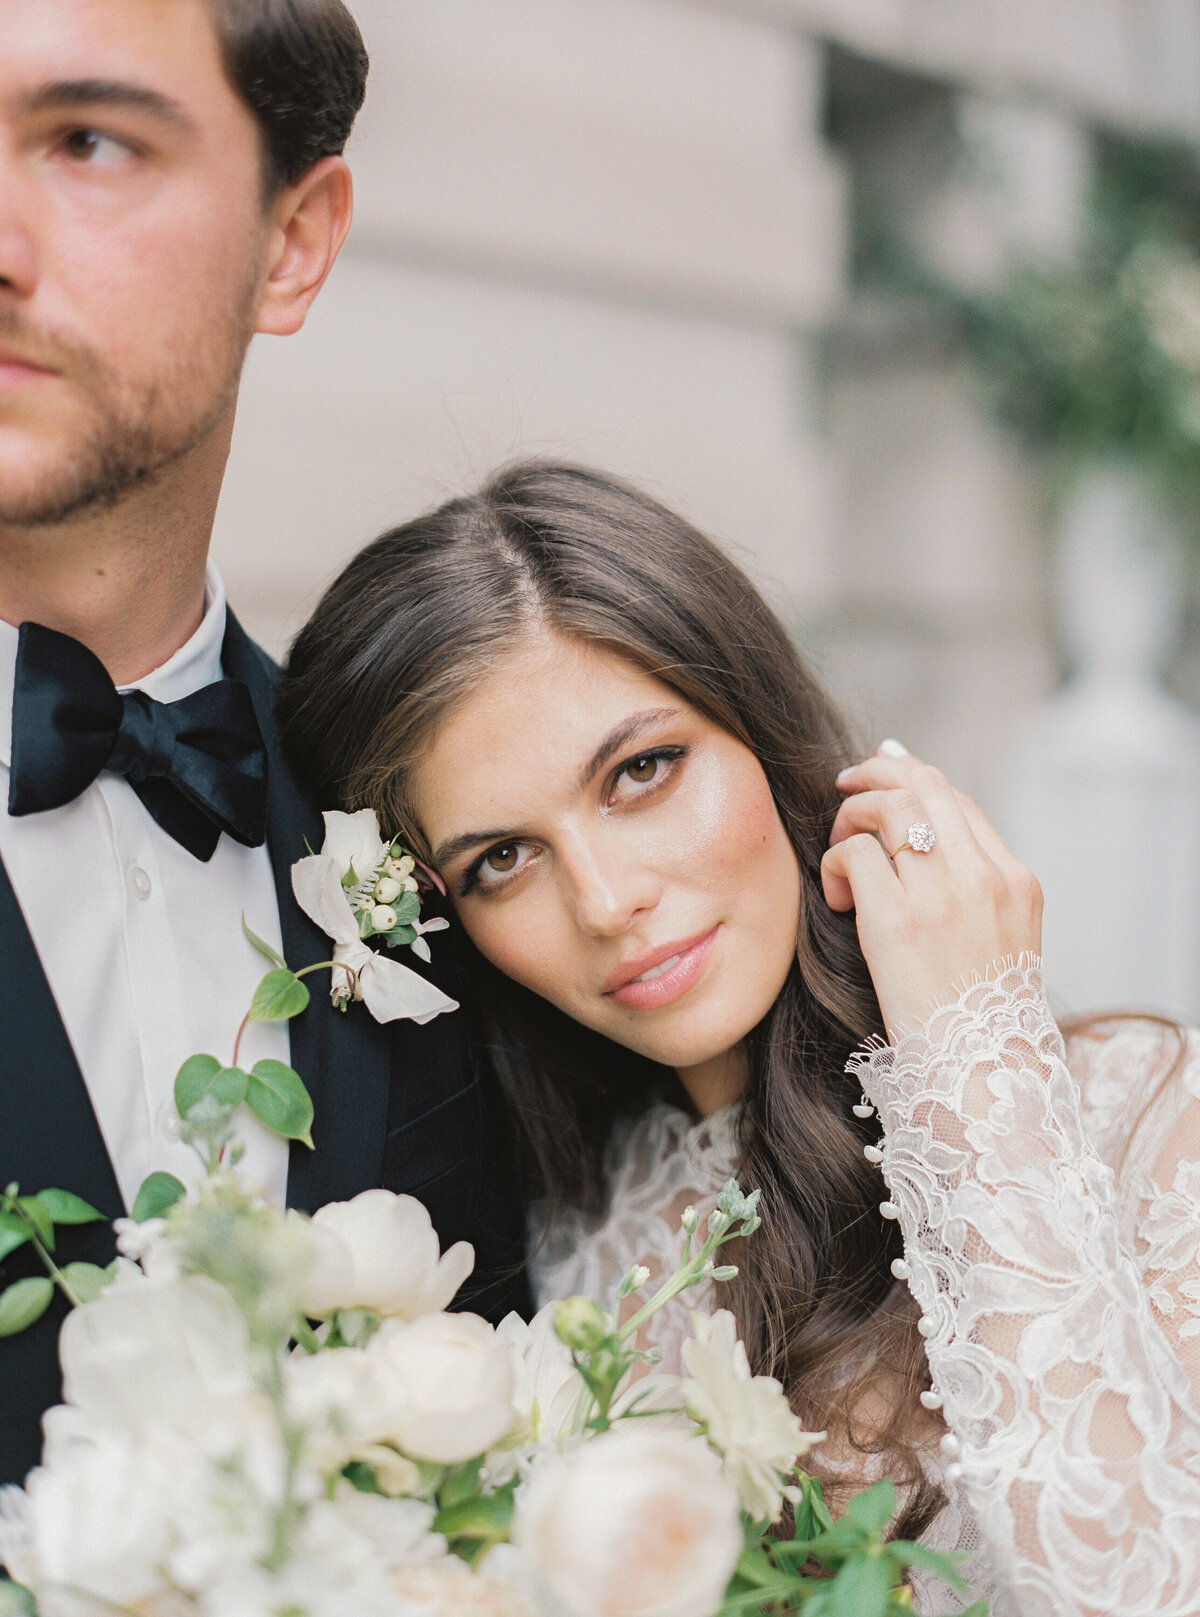 European inspired wedding at Larz Anderson House, Photo by Madeline Trent, Styled by East Made Co, Hair and makeup by Caitlyn Meyer, Featured in Style Me Pretty